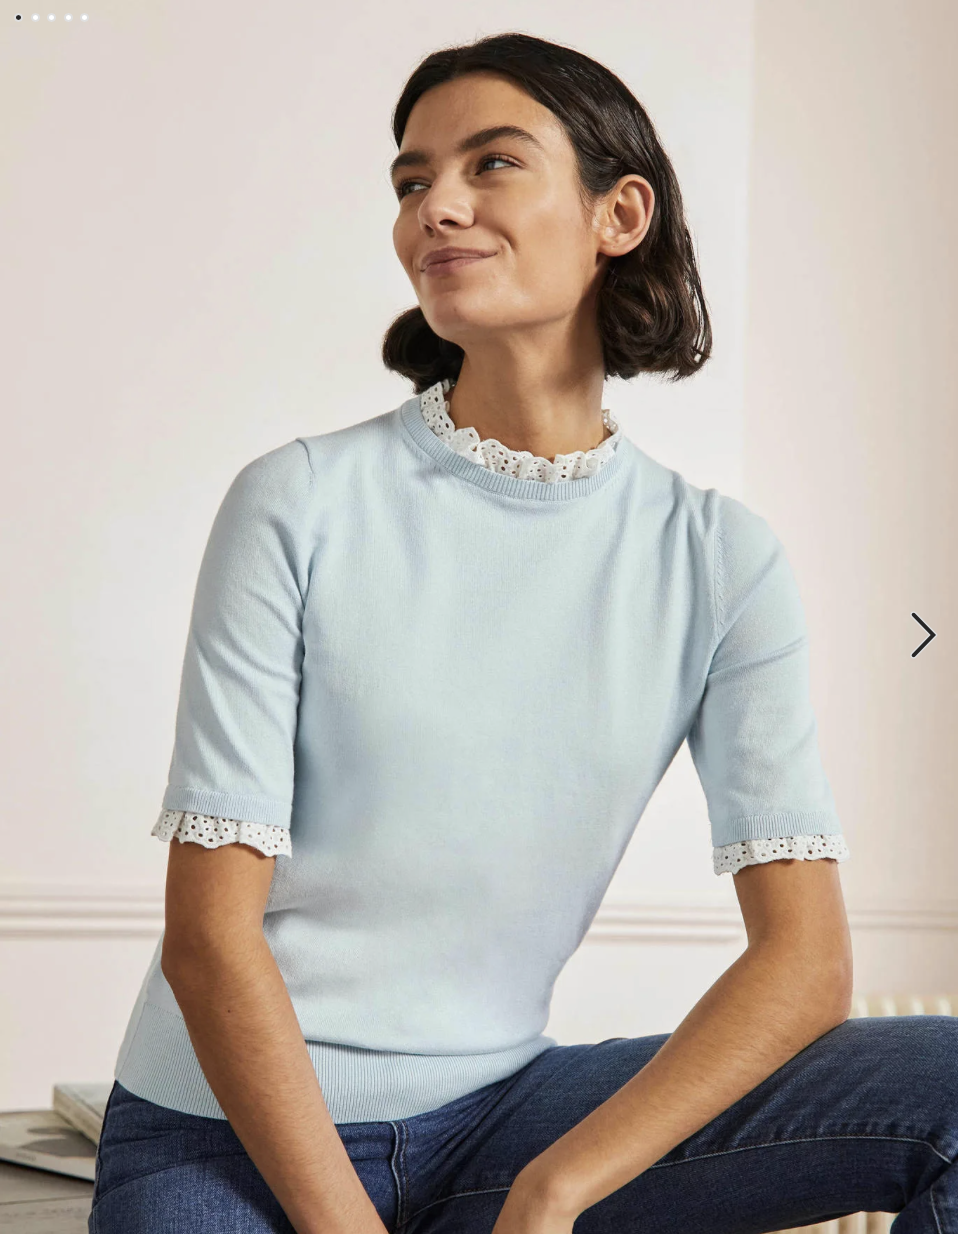 Boden: Up to 50% off sale styles + extra 10% off